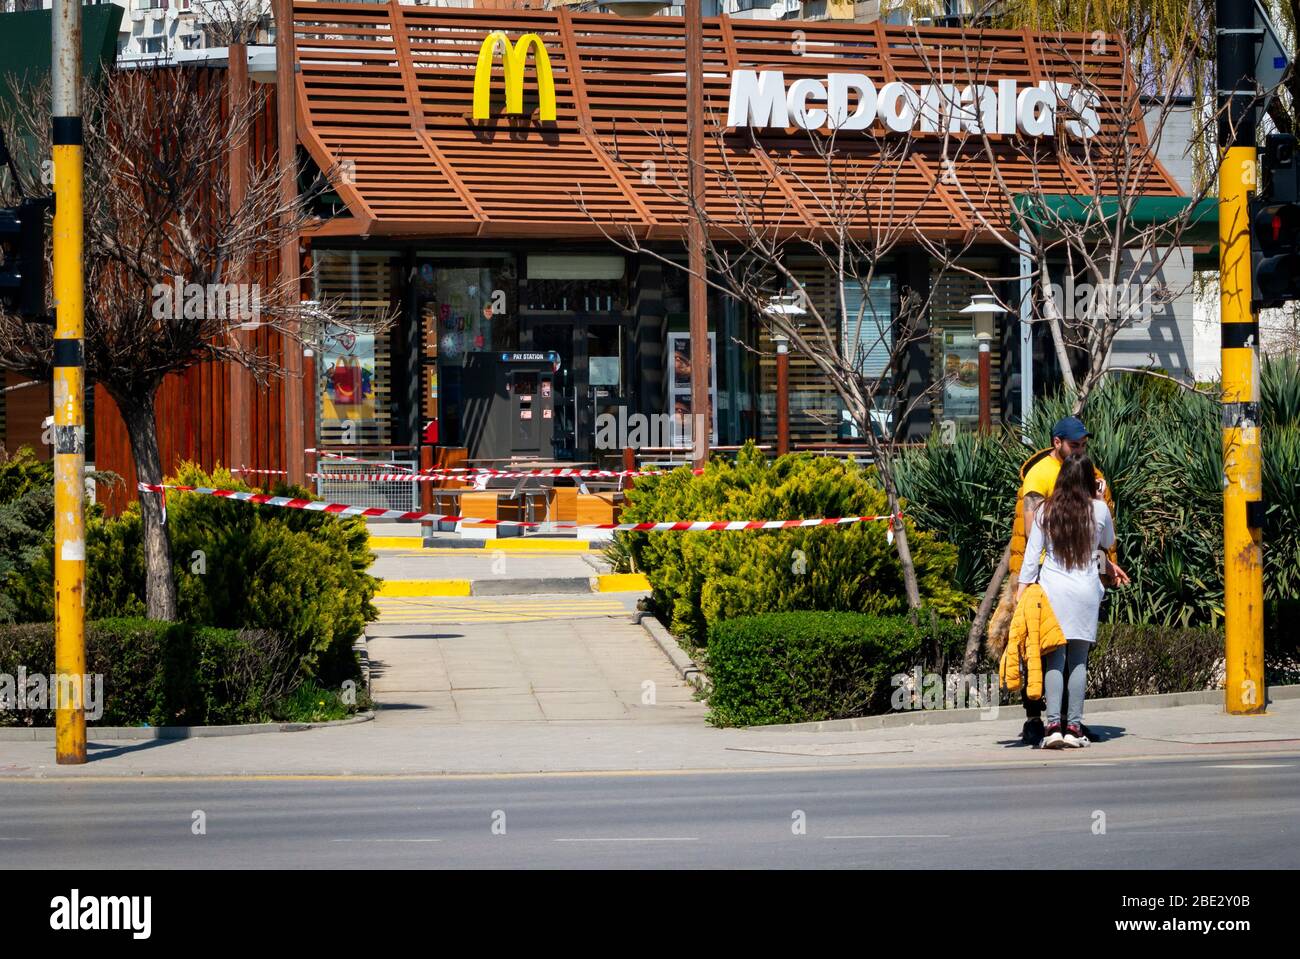 People standing in front of closed for normal business McDonald's fast food restaurant allowing only drive-in or drive-thru takeaway food due to the spread of the Coronavirus Pandemic of Covid-19 in Sofia, Bulgaria as 2020 Stock Photo